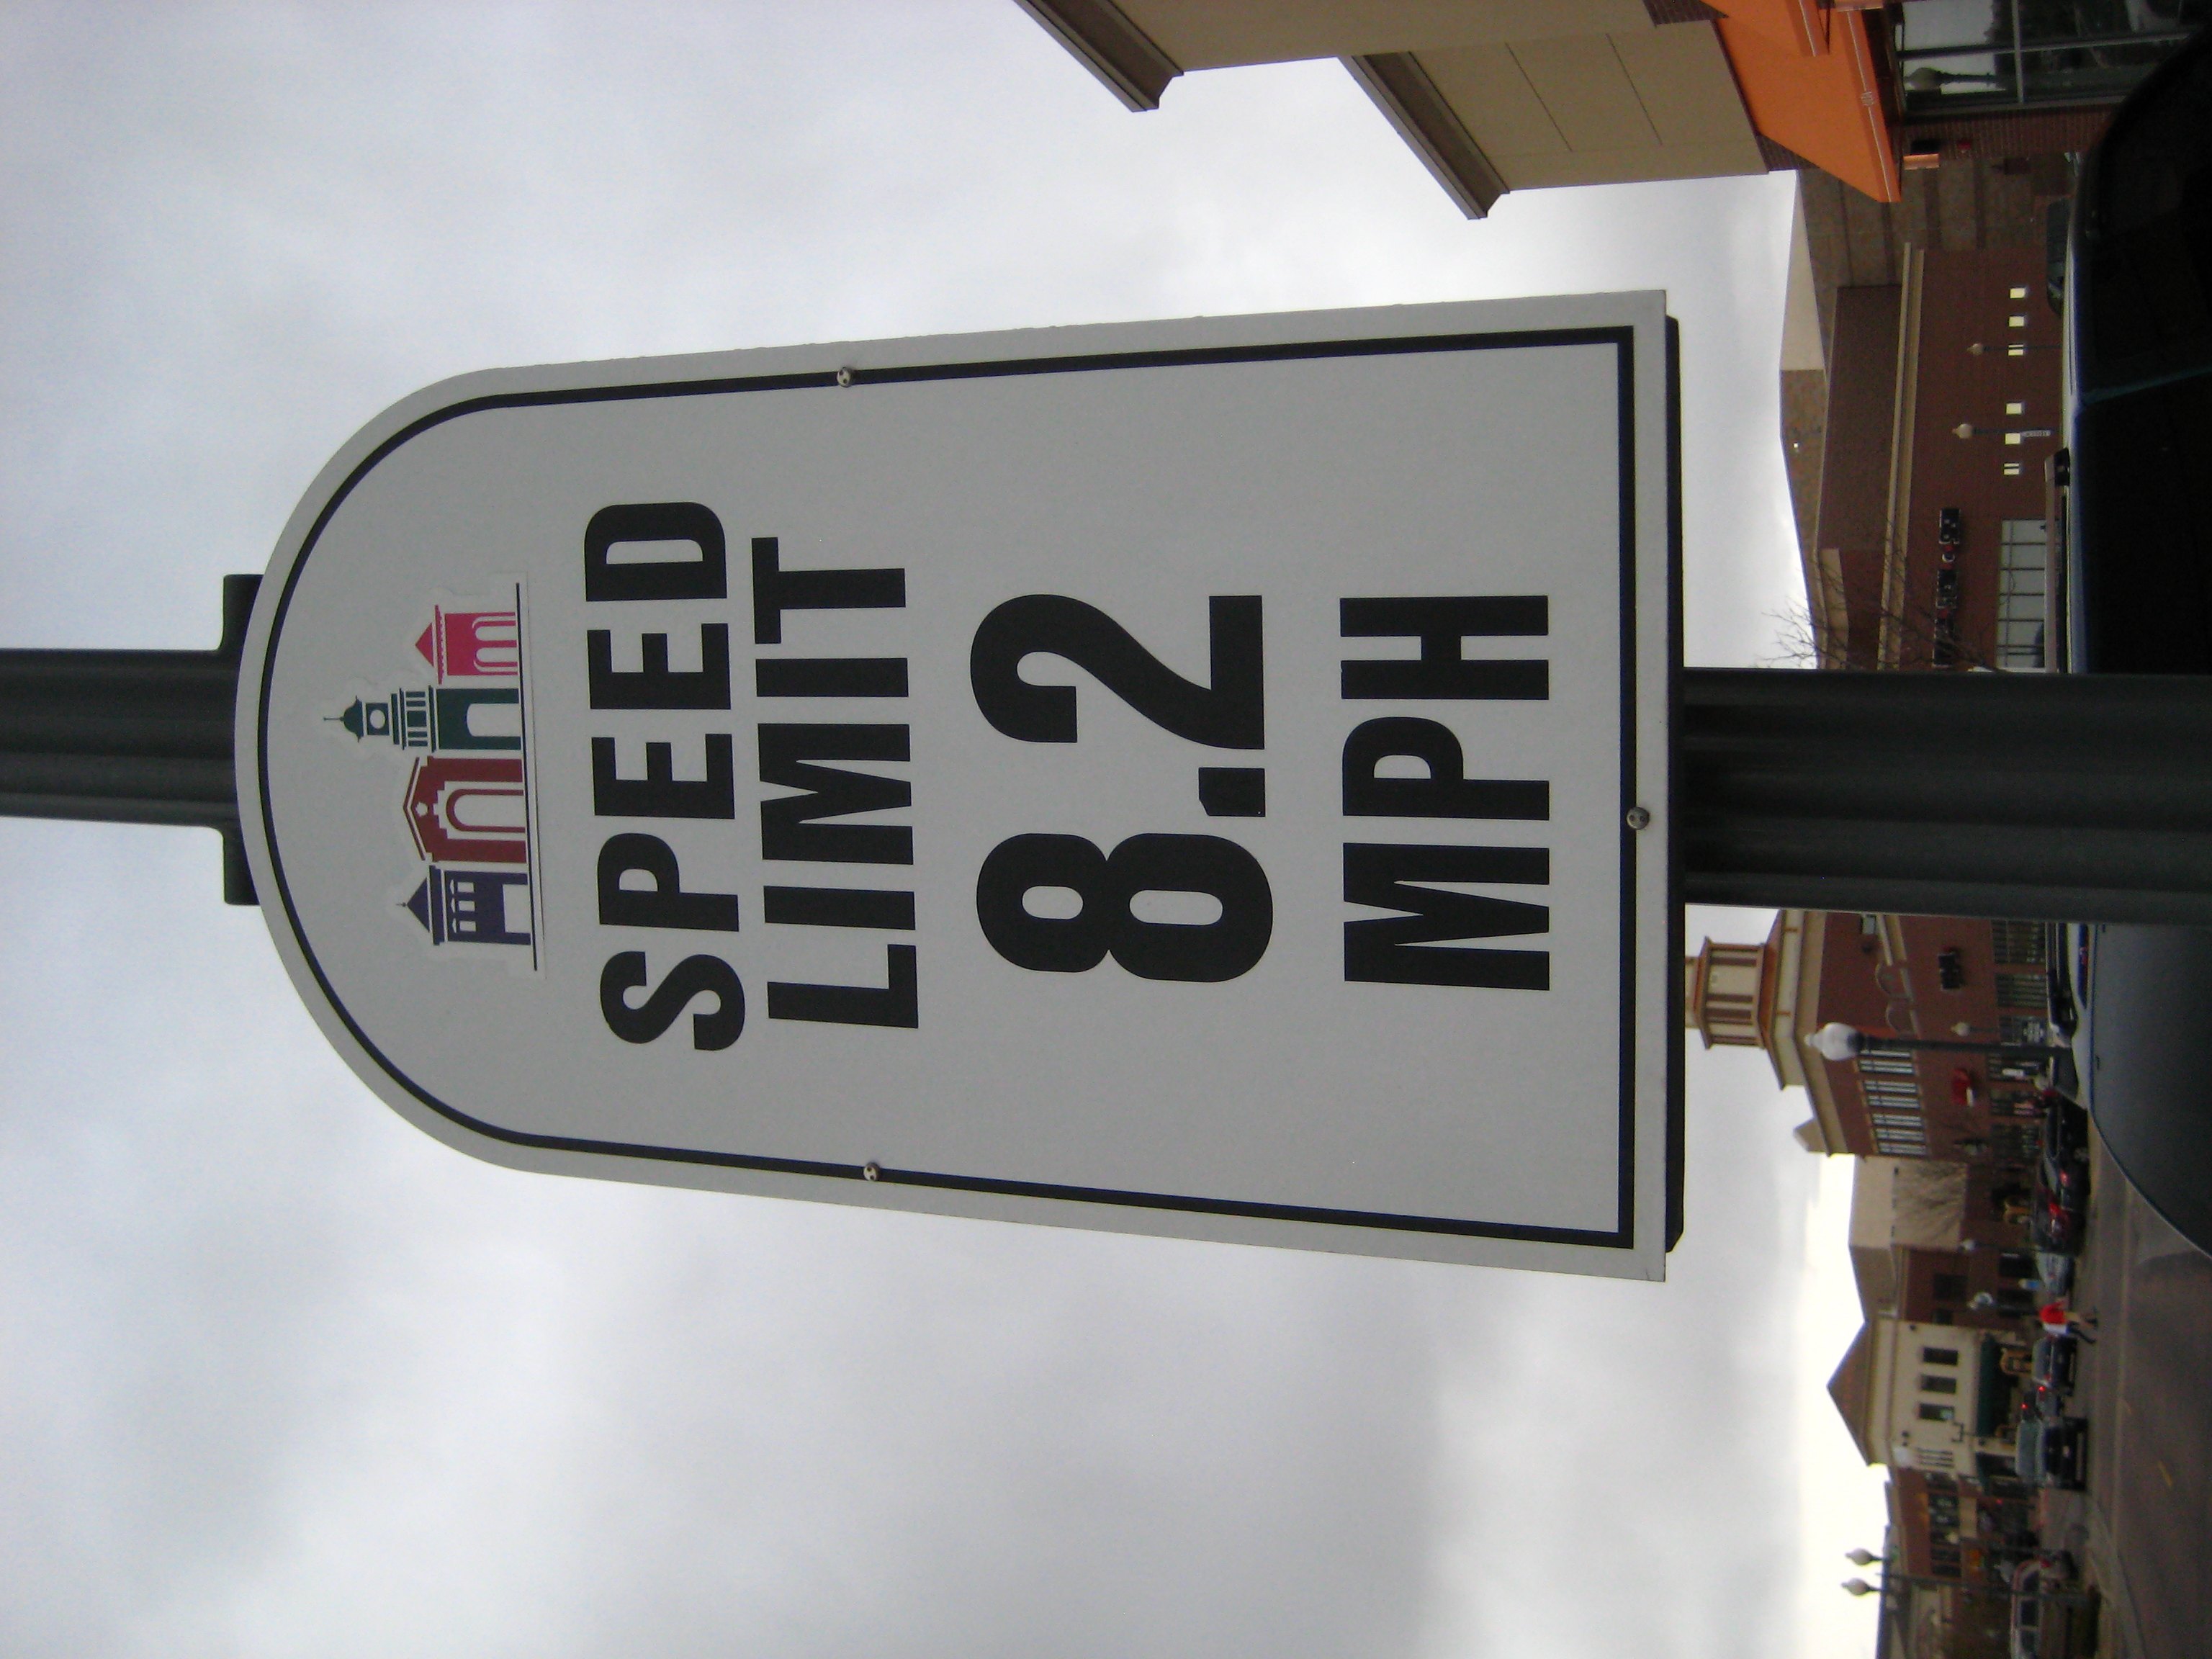 a speed limit sign with buildings in the background